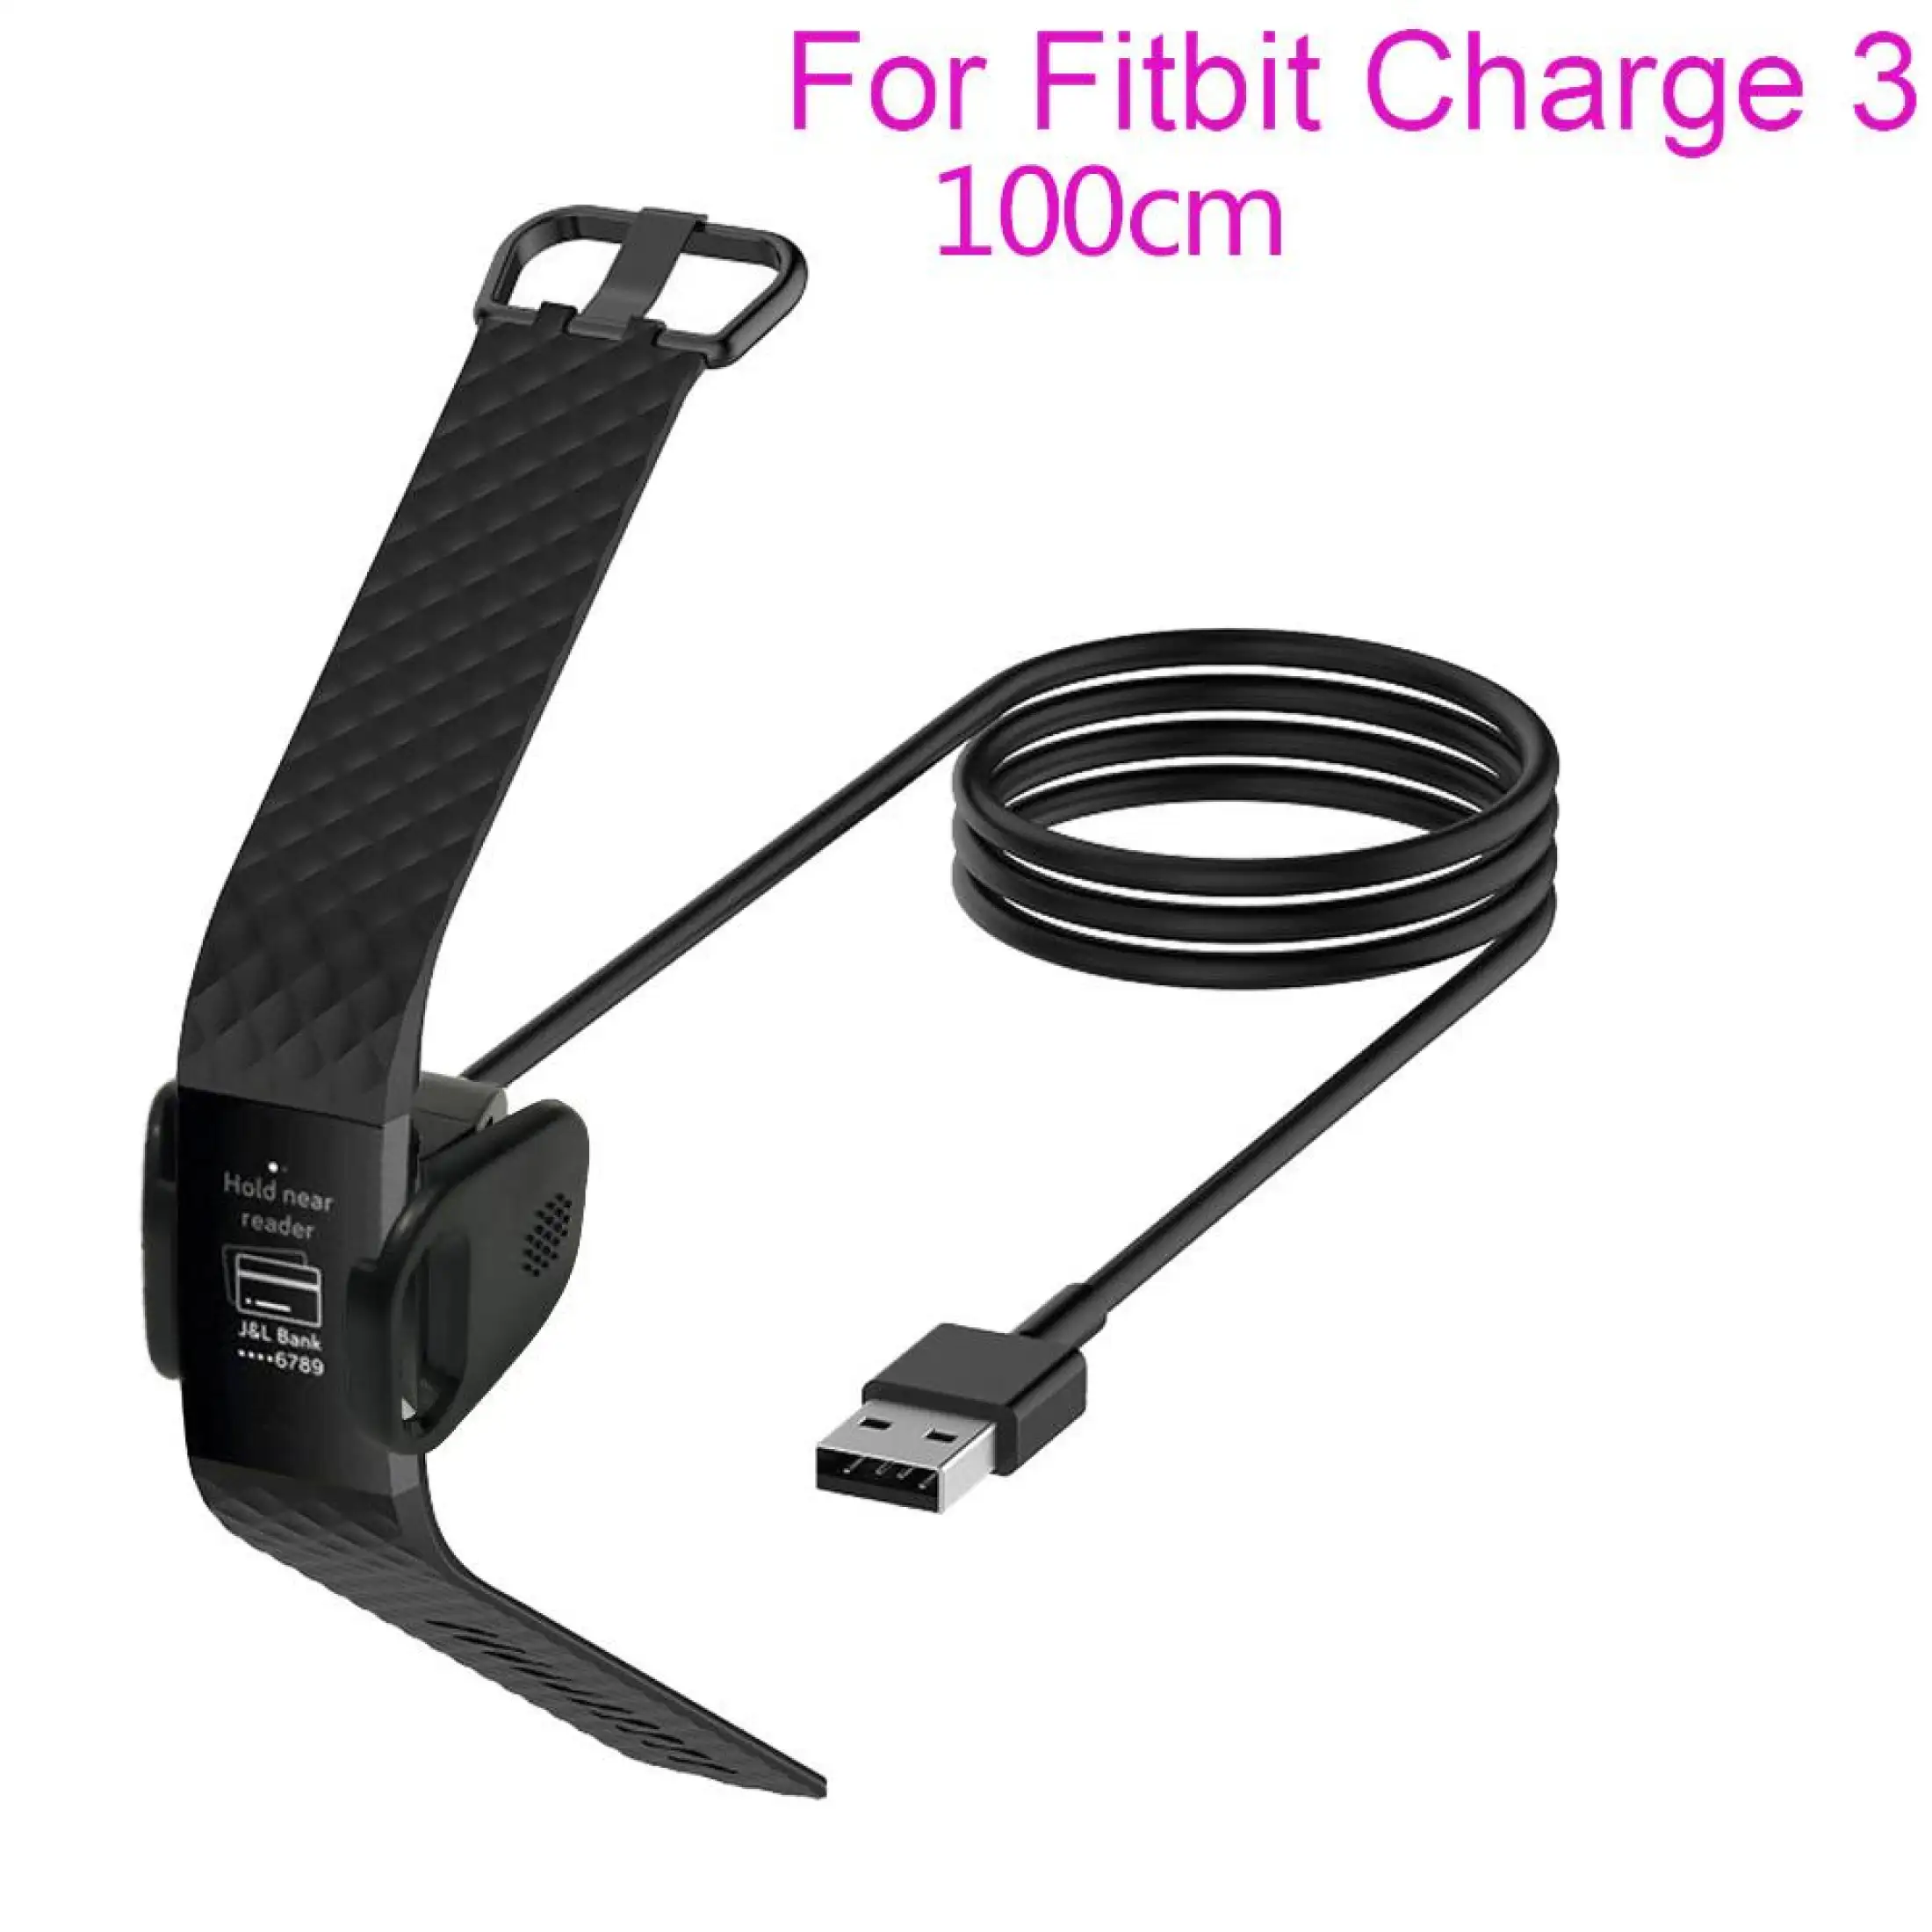 fitbit charge 3 bundle pack